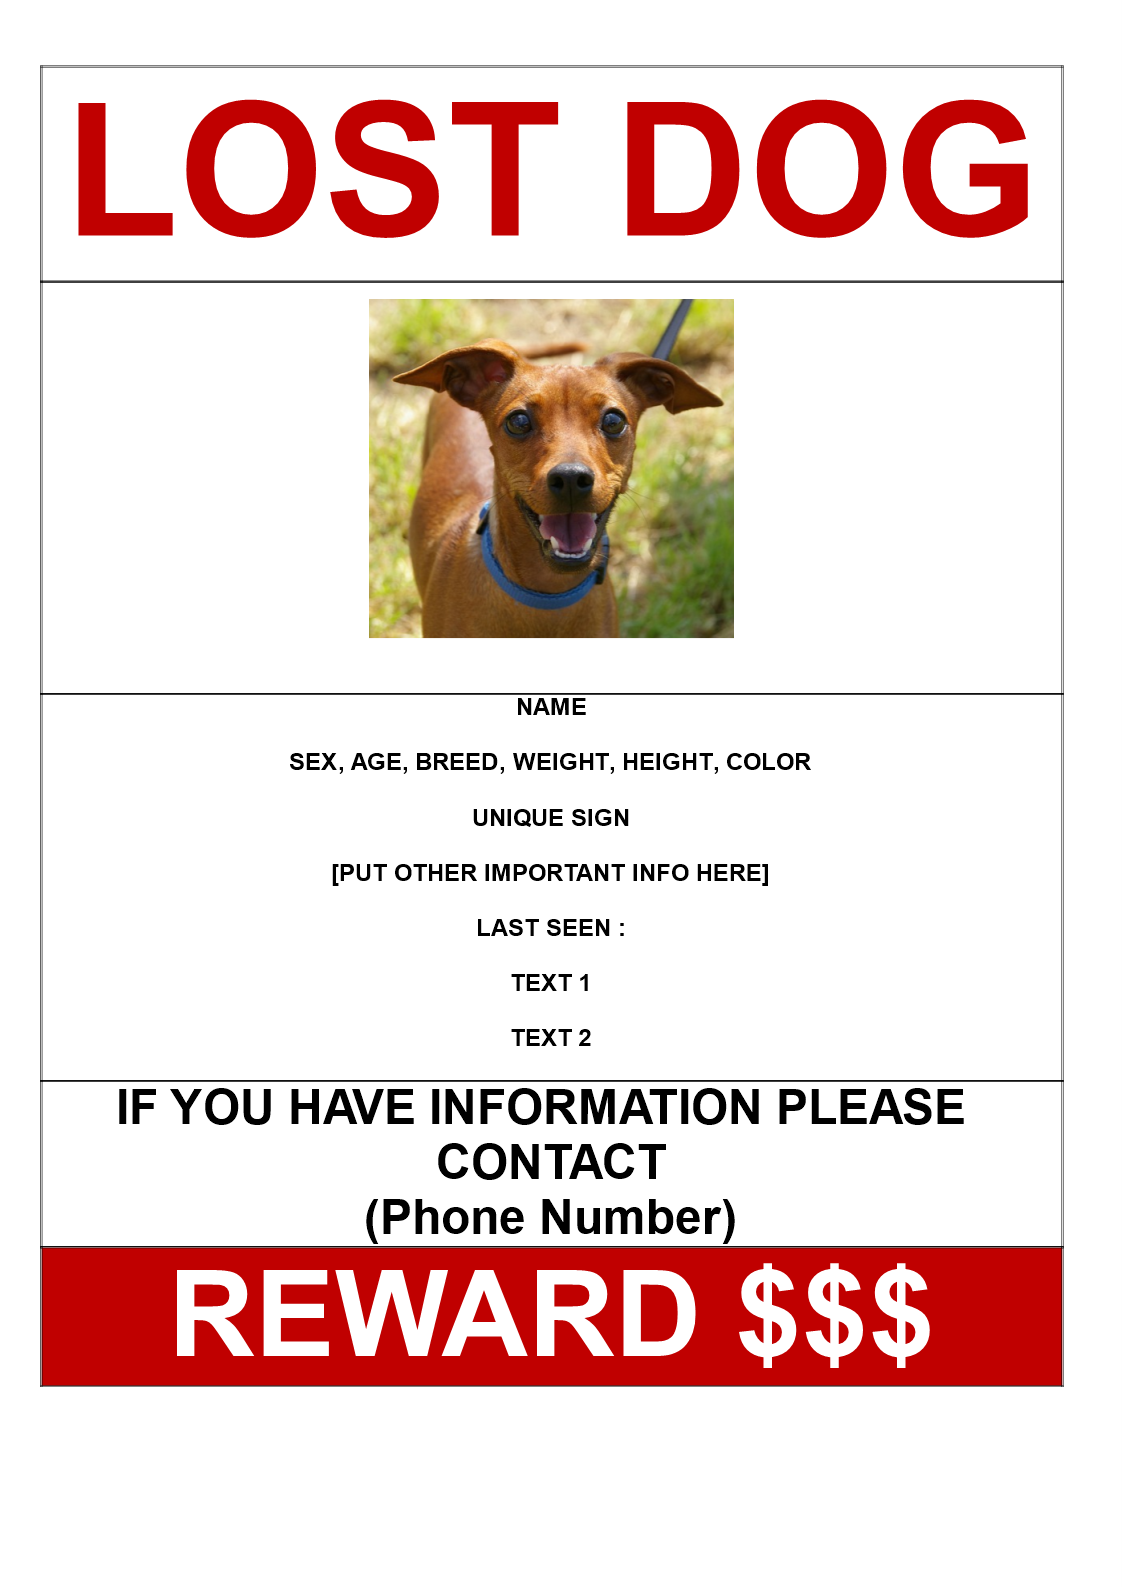 missing dog poster with reward a3 size modèles